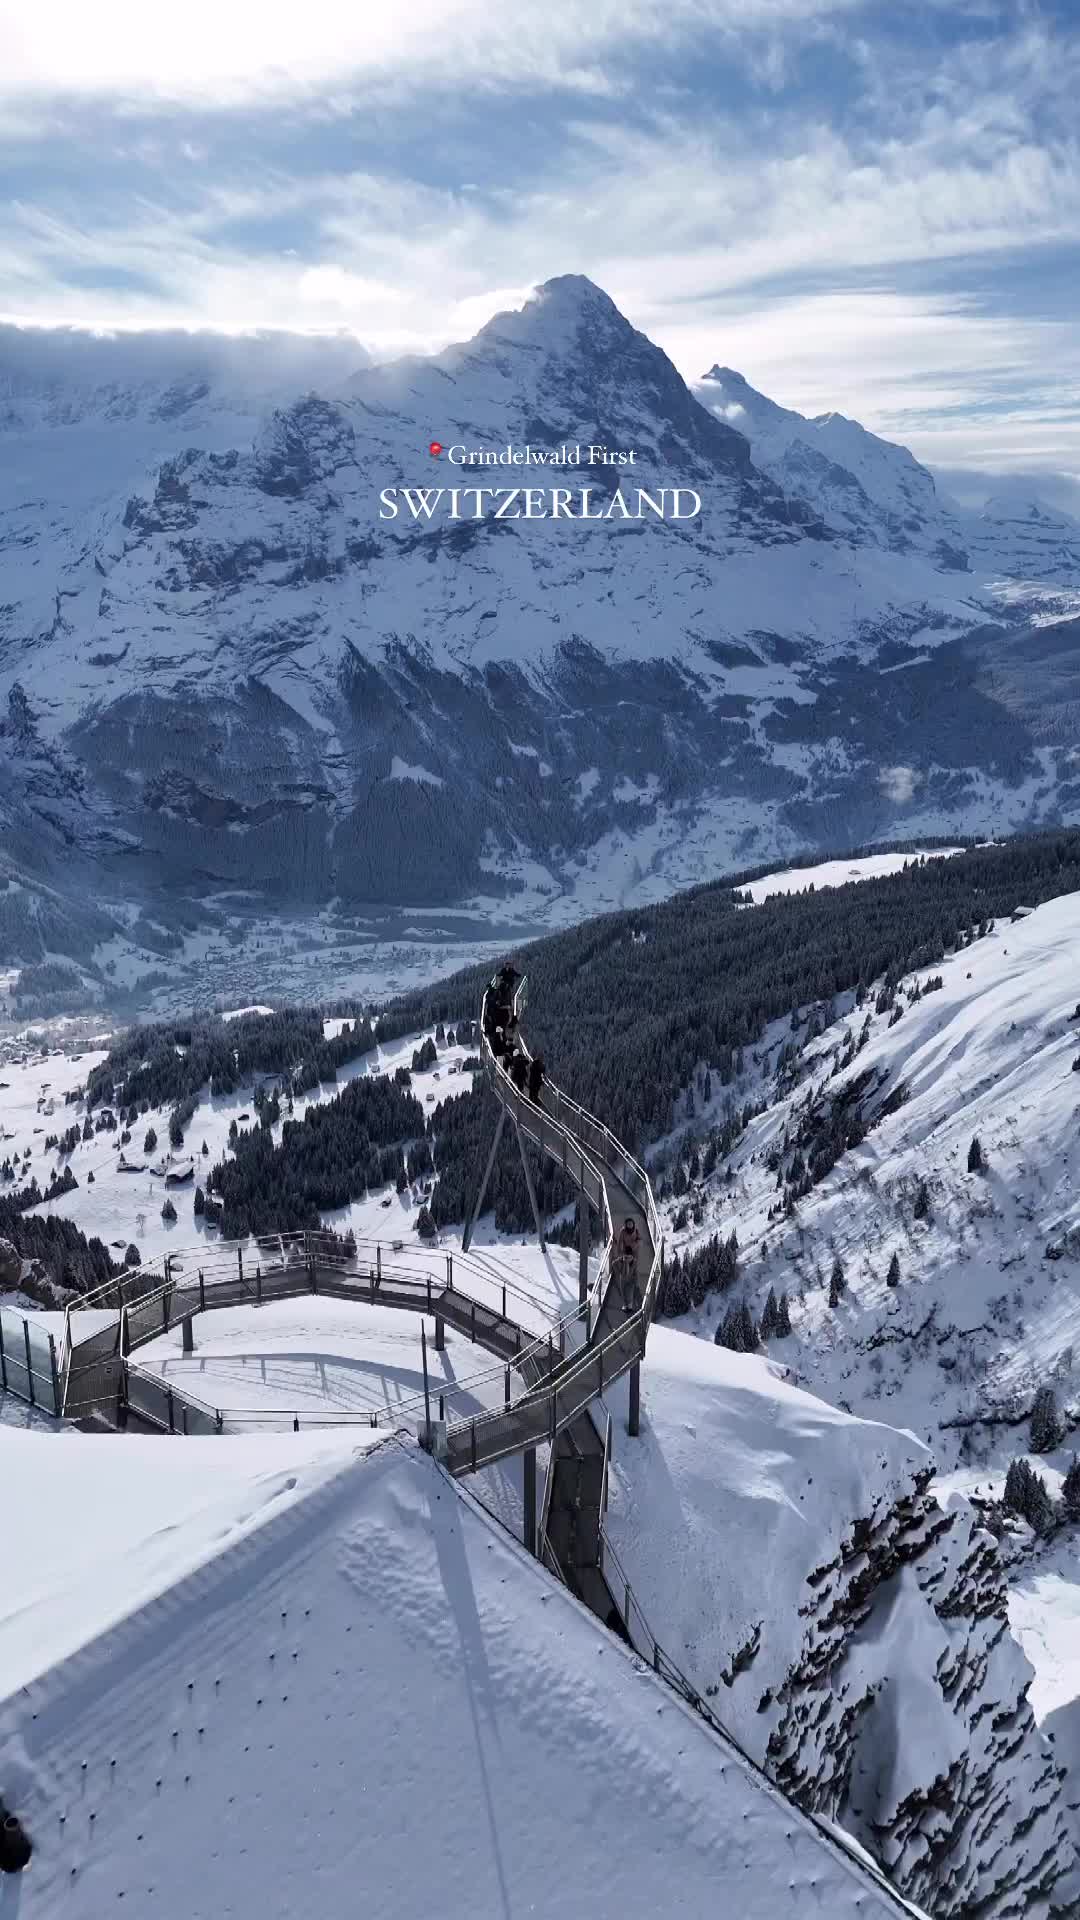 Thrilling Views at First Cliff Walk, Grindelwald 🇨🇭